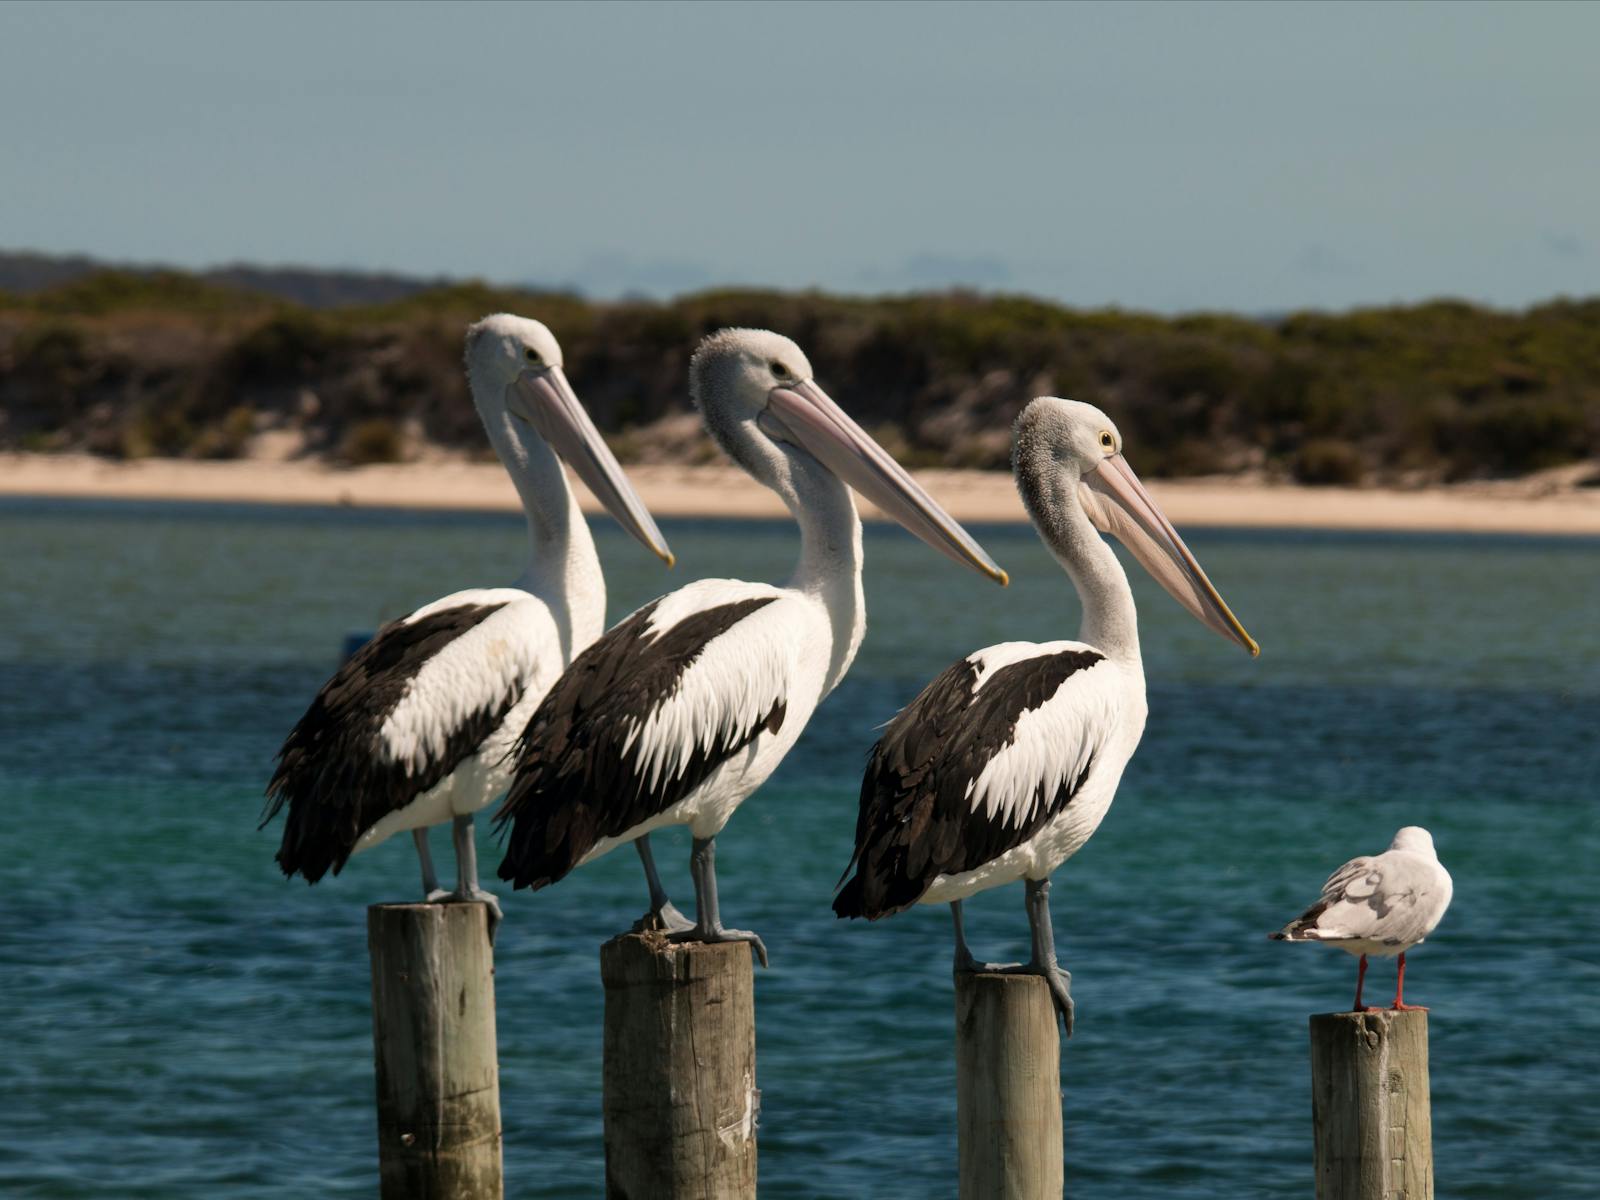 3 pelicans & 1 seagull on posts